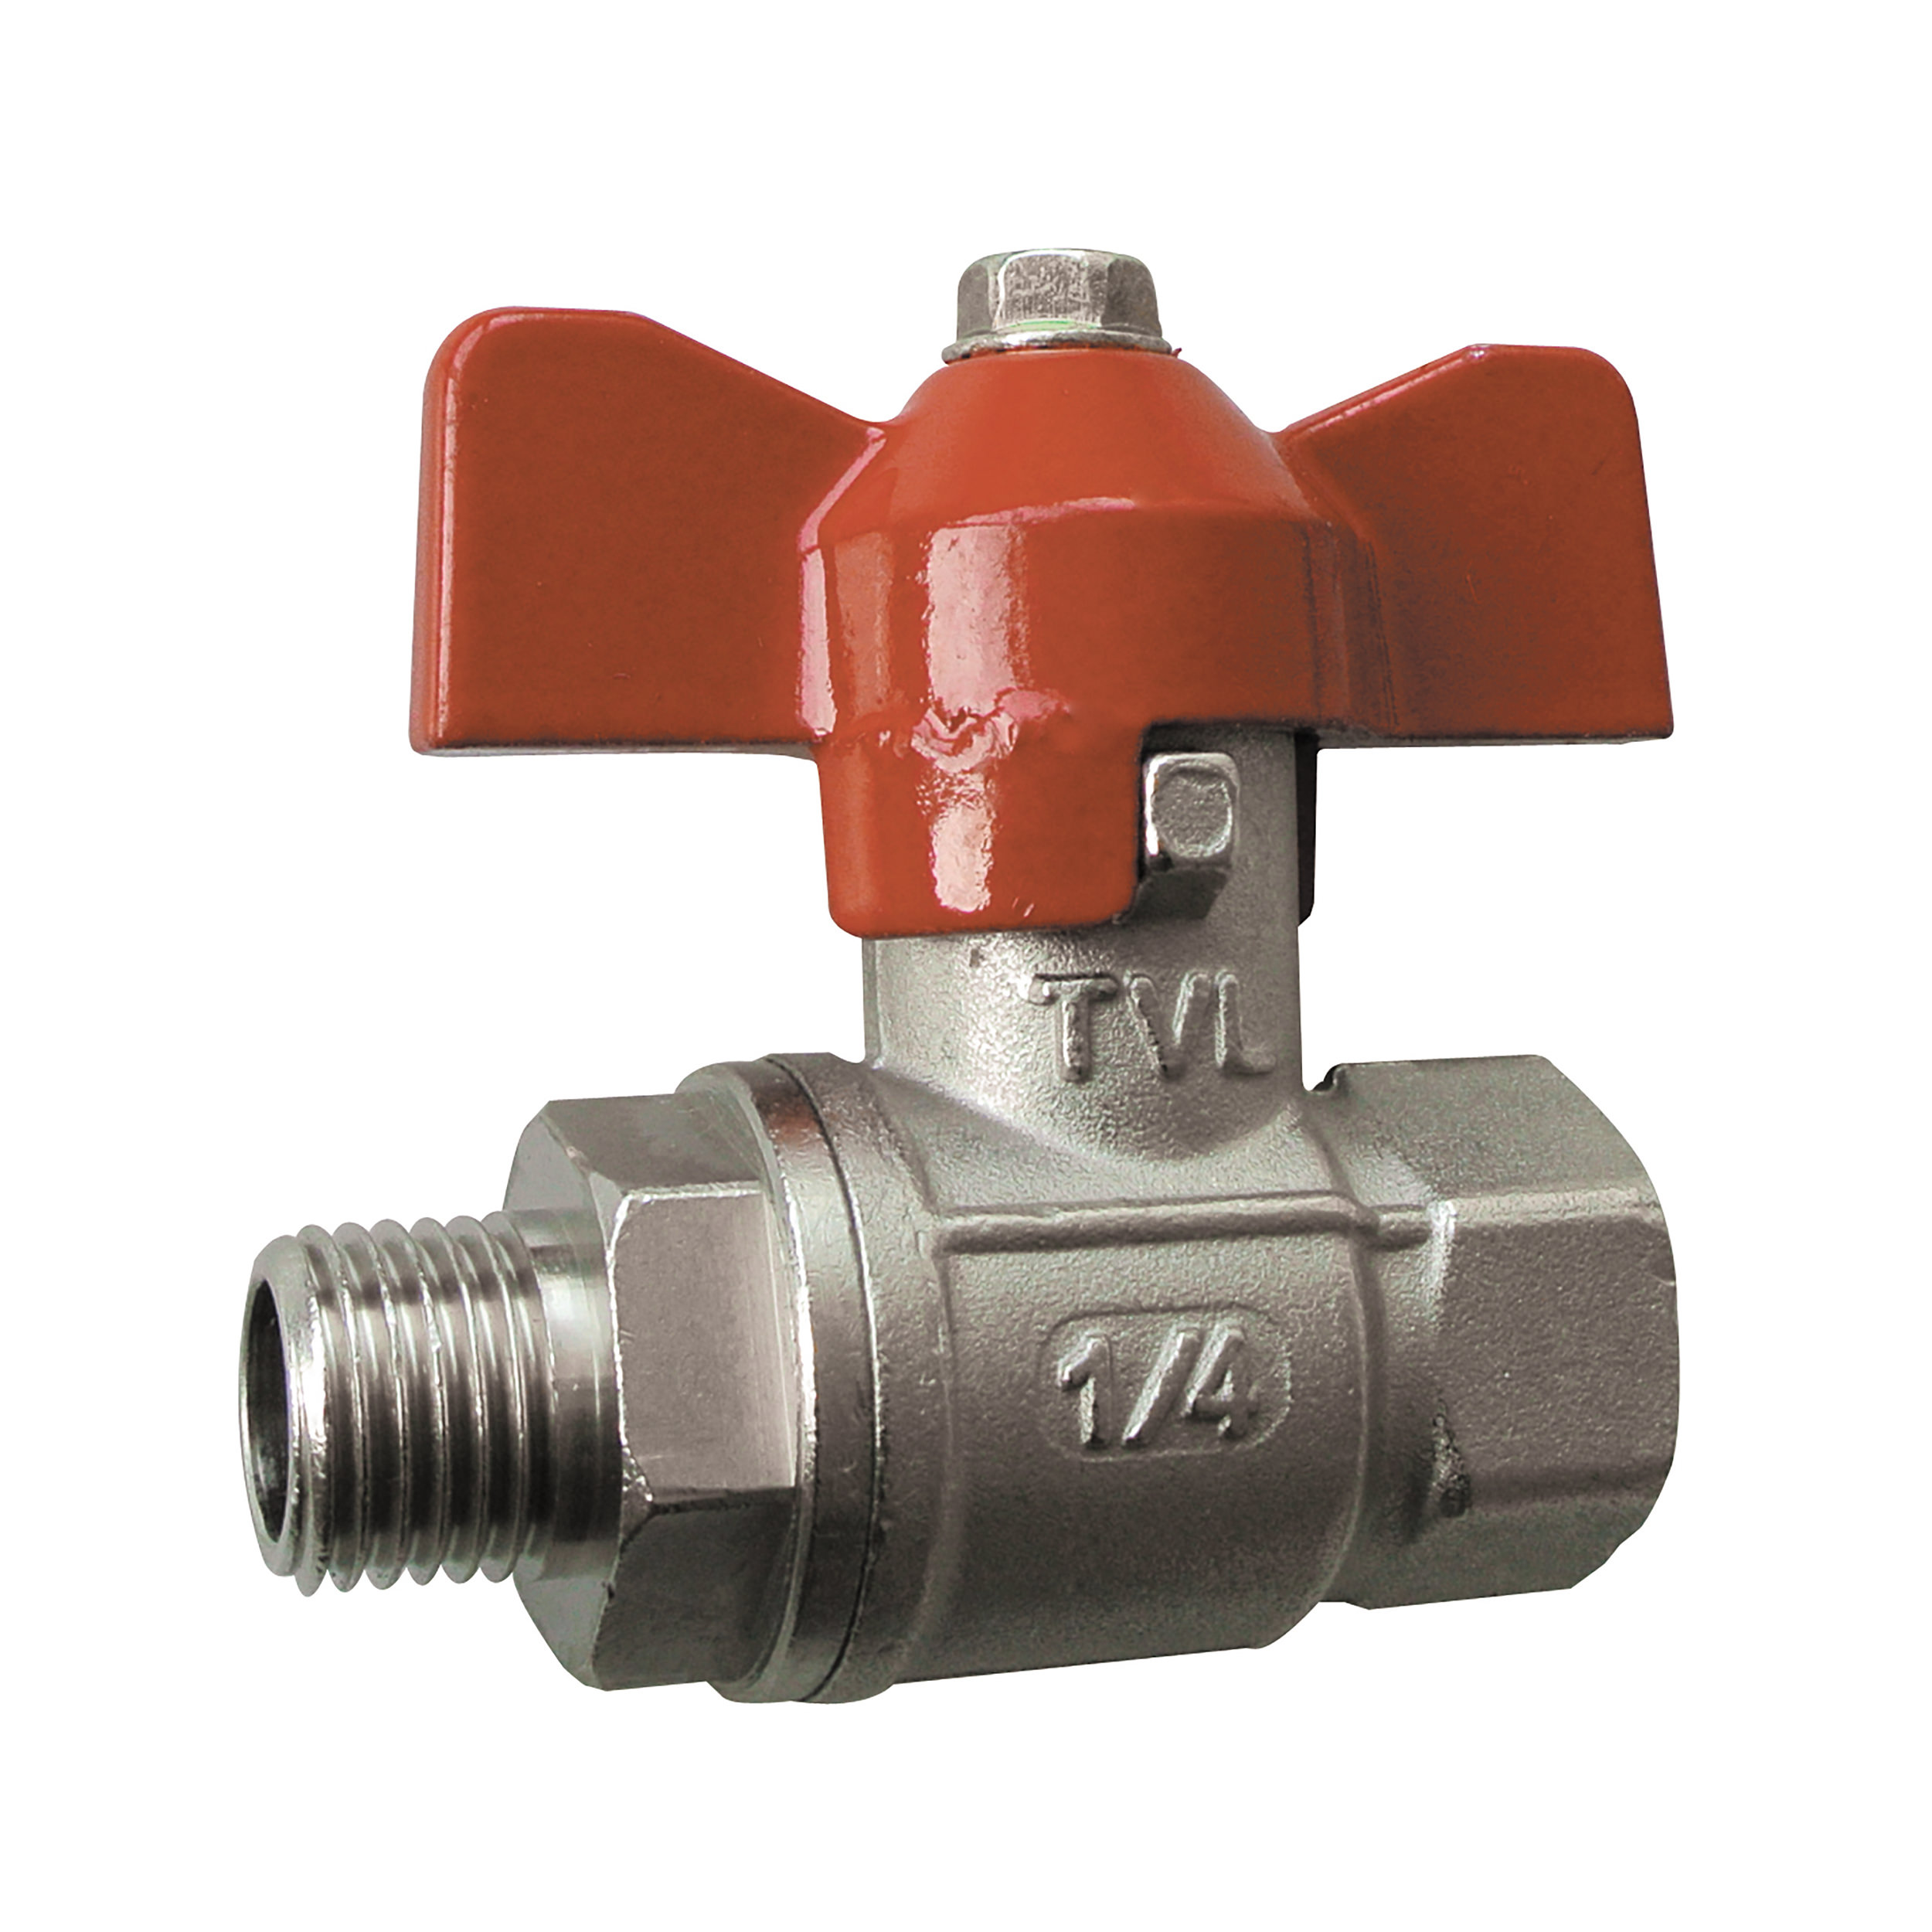 Mini ball valve, metal toggle, max. operating pressure: 435 psi, length: 48 mm, DN 10, connection thread: G⅜ female–male